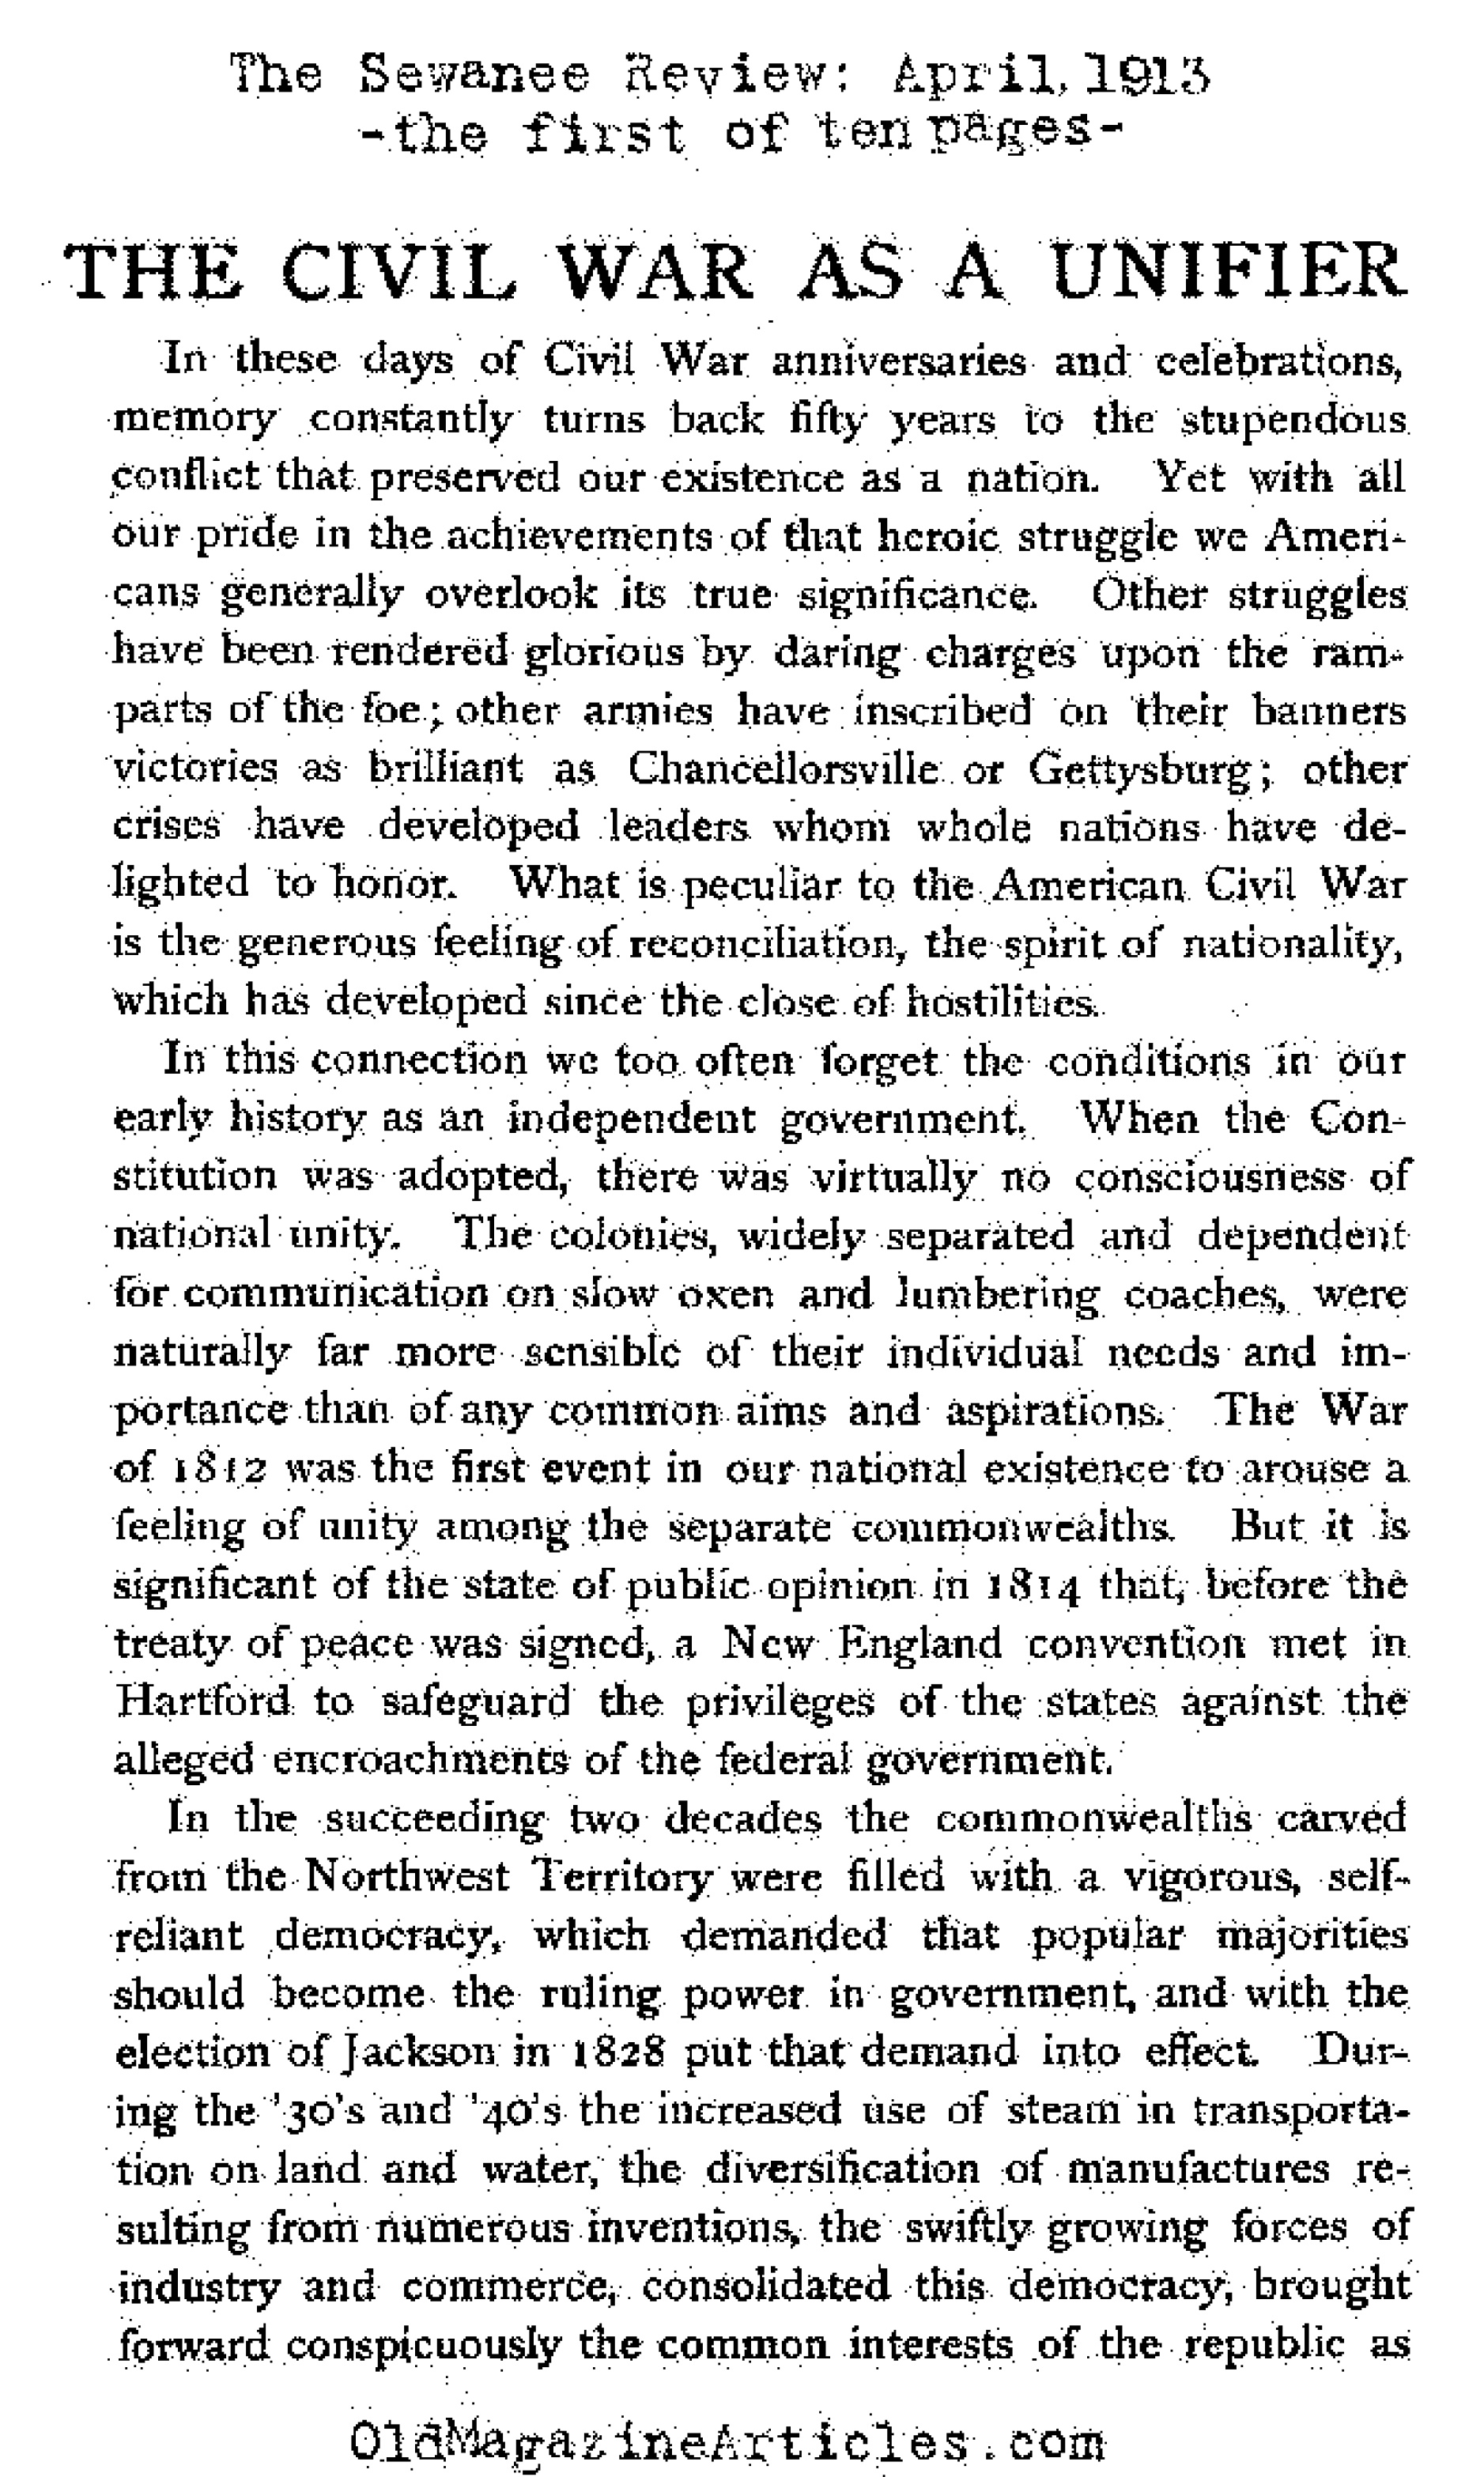 The American Civil War and the Unity it Created (The Sewanee Review, 1913)